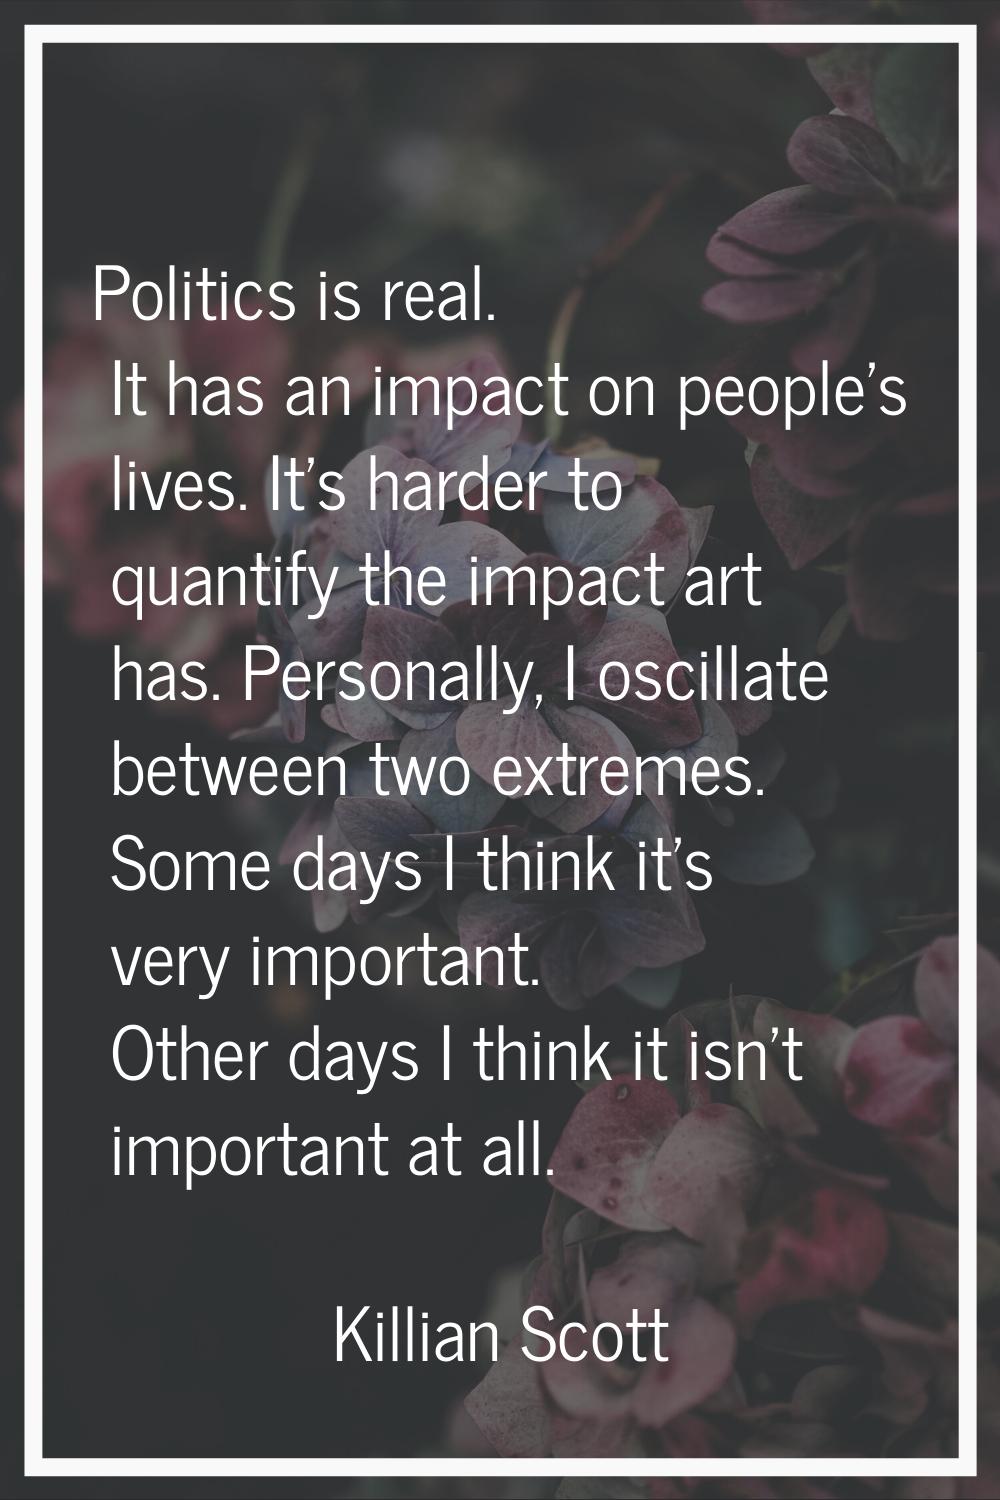 Politics is real. It has an impact on people's lives. It's harder to quantify the impact art has. P